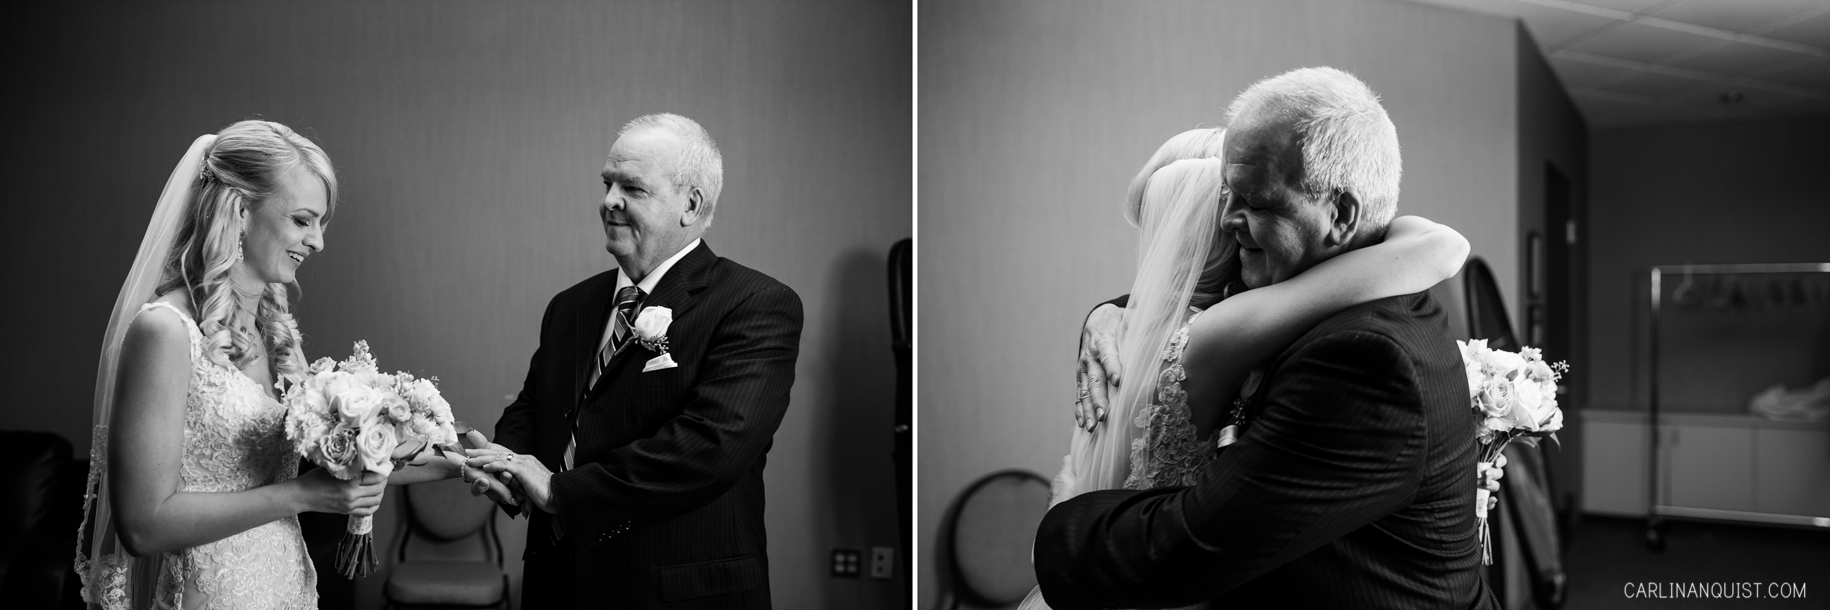 First Look with Dad | Cochrane Wedding Photographer